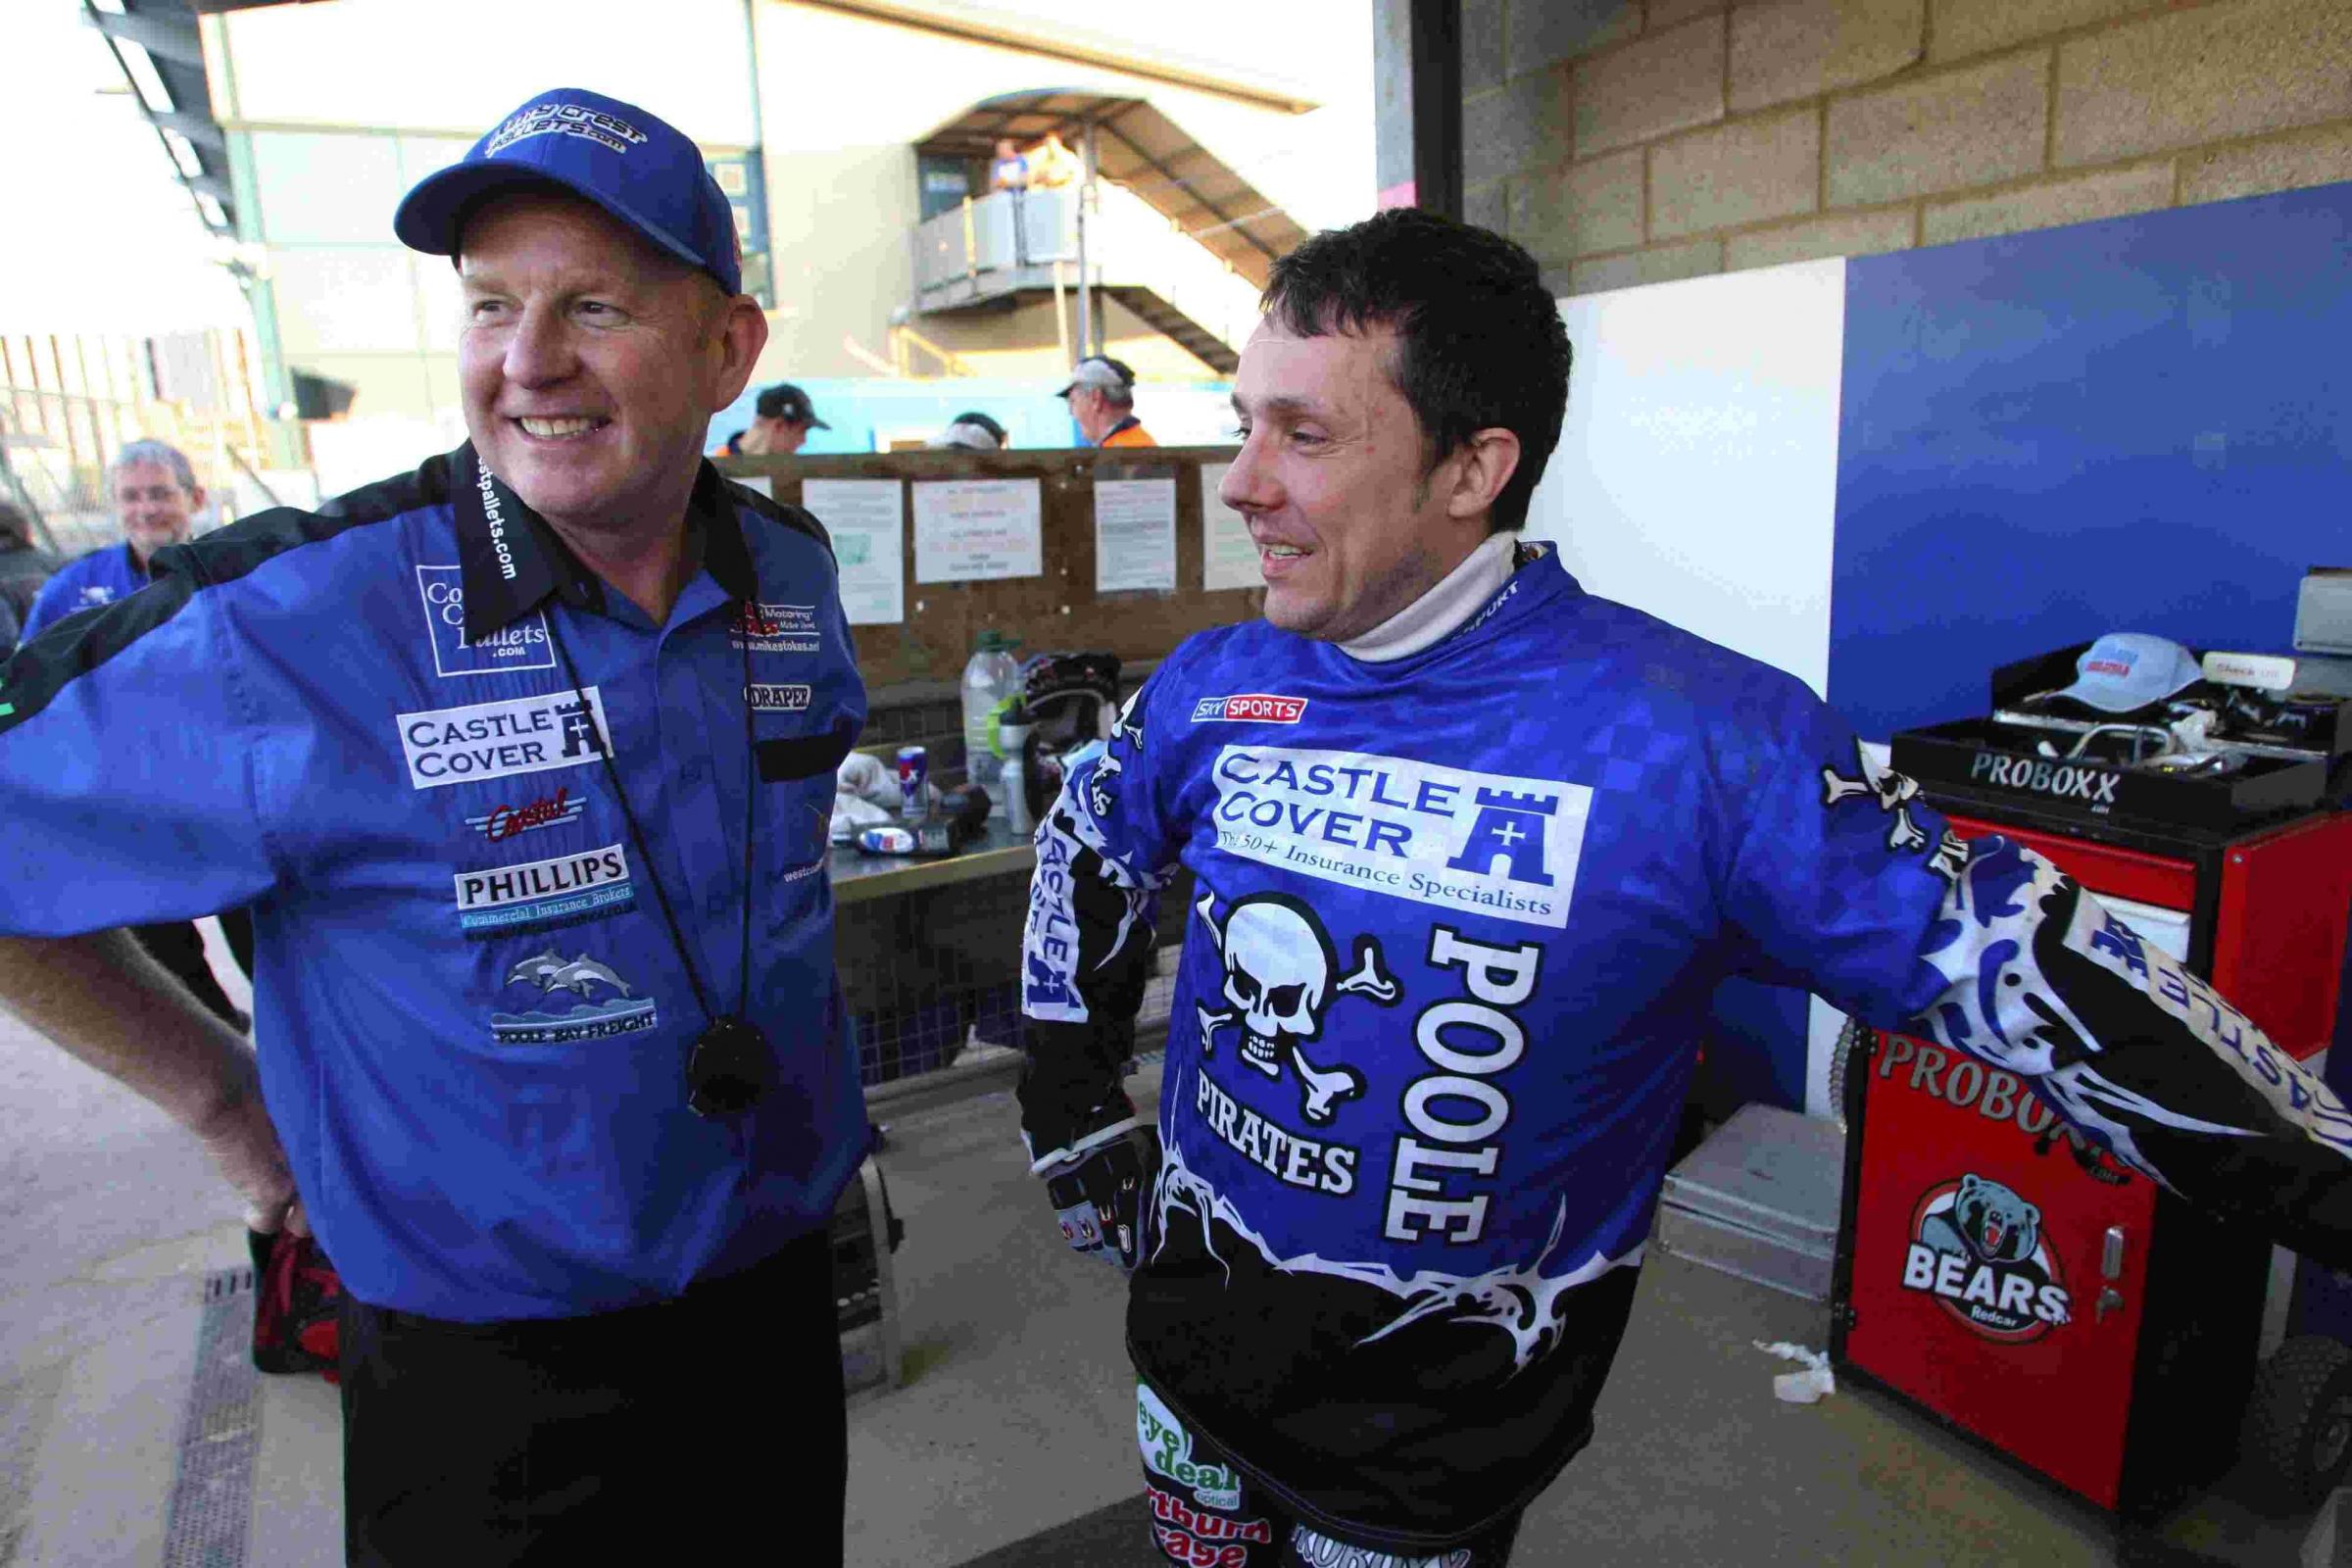 Picture by Richard Crease - 20/4/11 - PirRobbHave5 - words by sport - Speedway - Poole Pirates v Swindon Robbins - Gary Havelock and Neil Middleditch